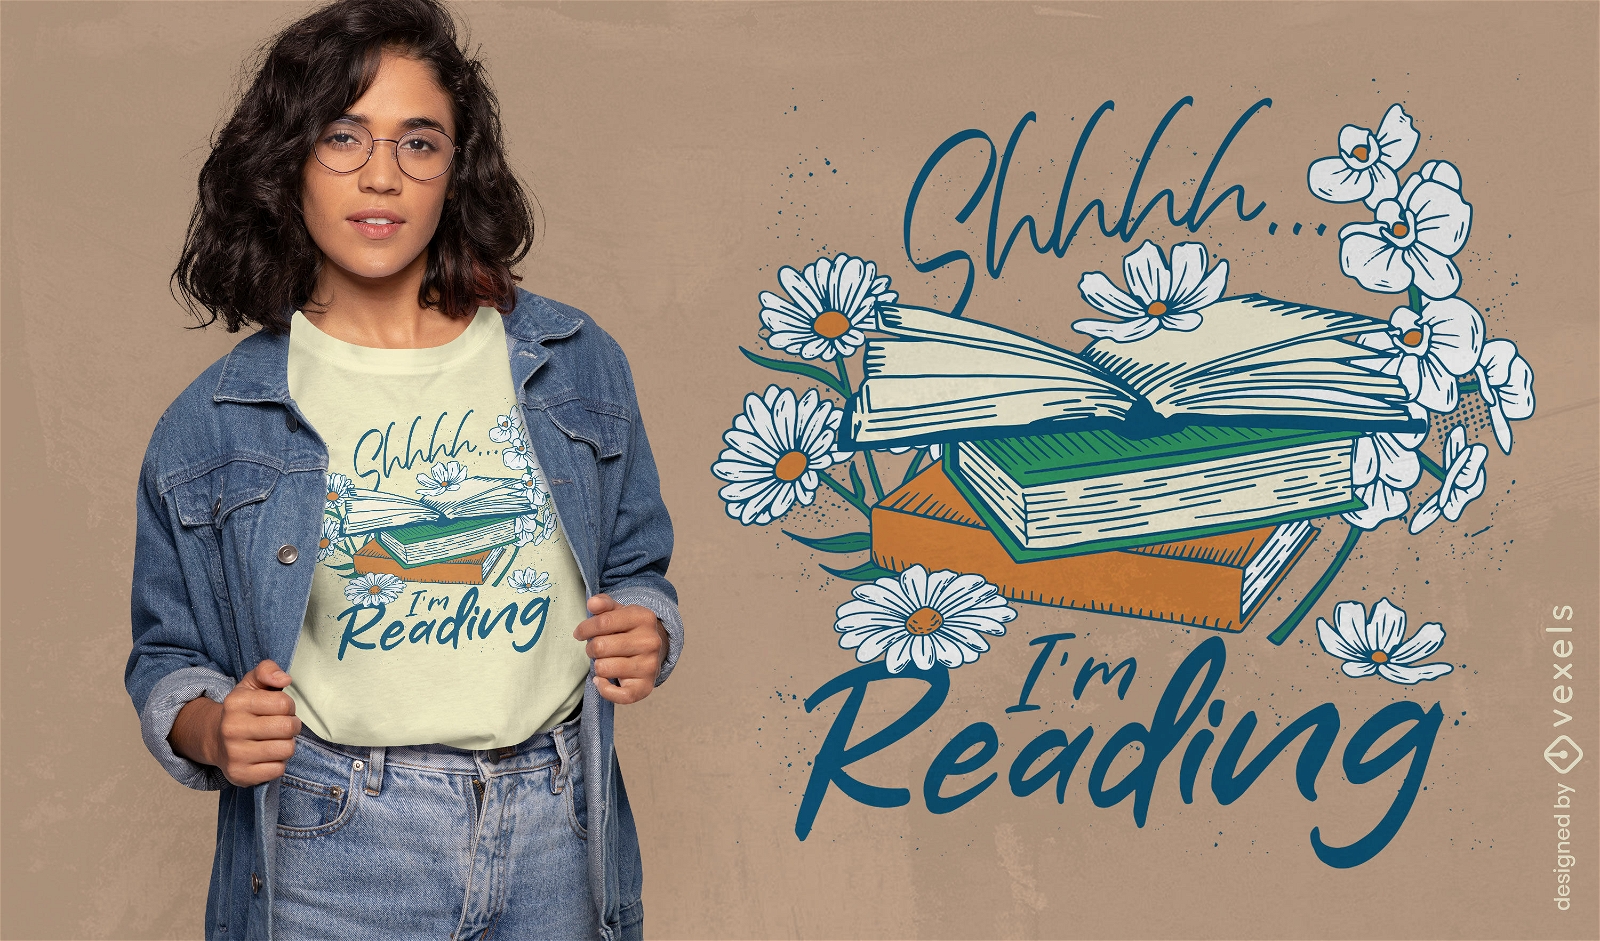 Books and flowers reading t-shirt design